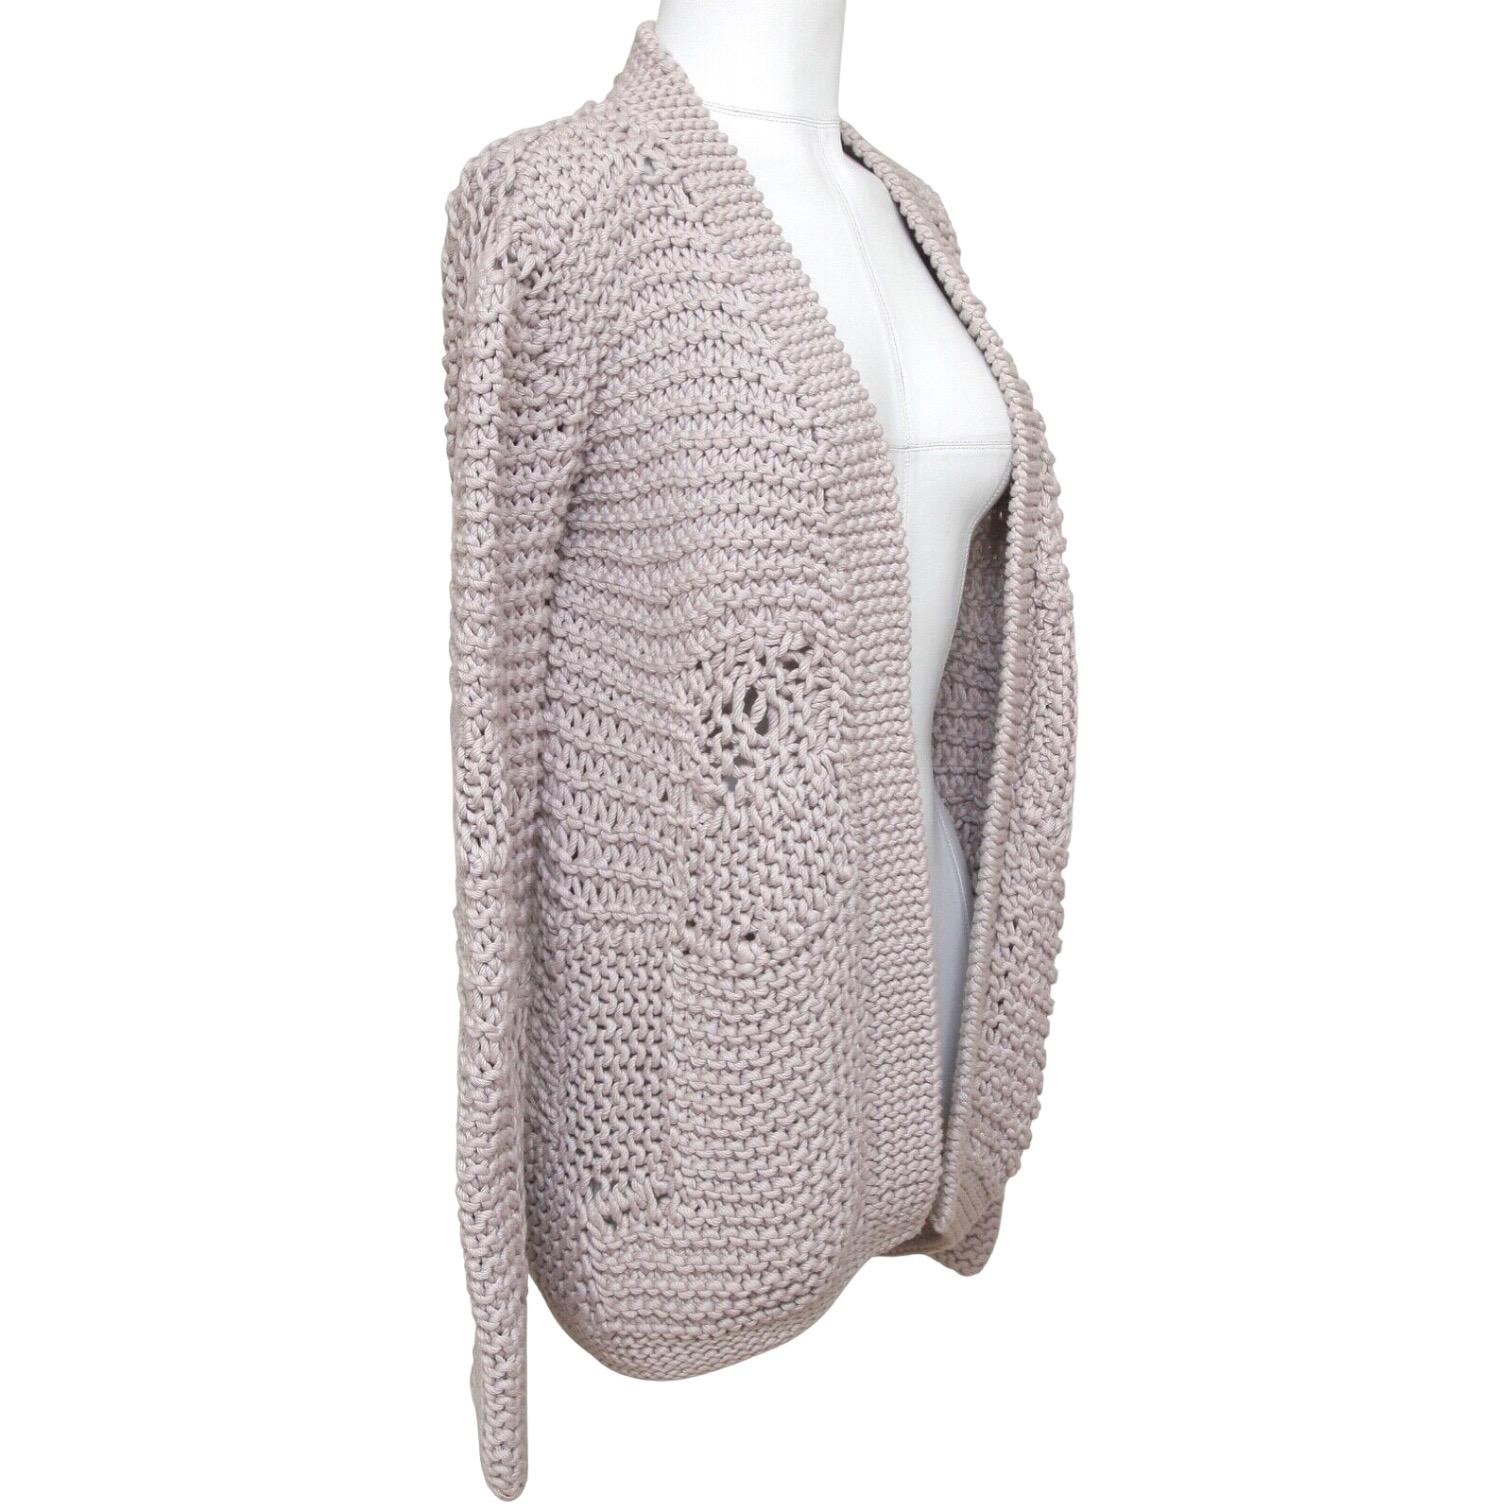 GUARANTEED AUTHENTIC CHLOE 2008 OPEN FRONT COTTON CABLE KNIT CARDIGAN

Details:
- Greyish-lavender cable cotton knit cardigan has a great easy fit.
- Open front.
- Long sleeve.
- Easy great piece for your Chloe collection.

Size: S

Fabric: 100%